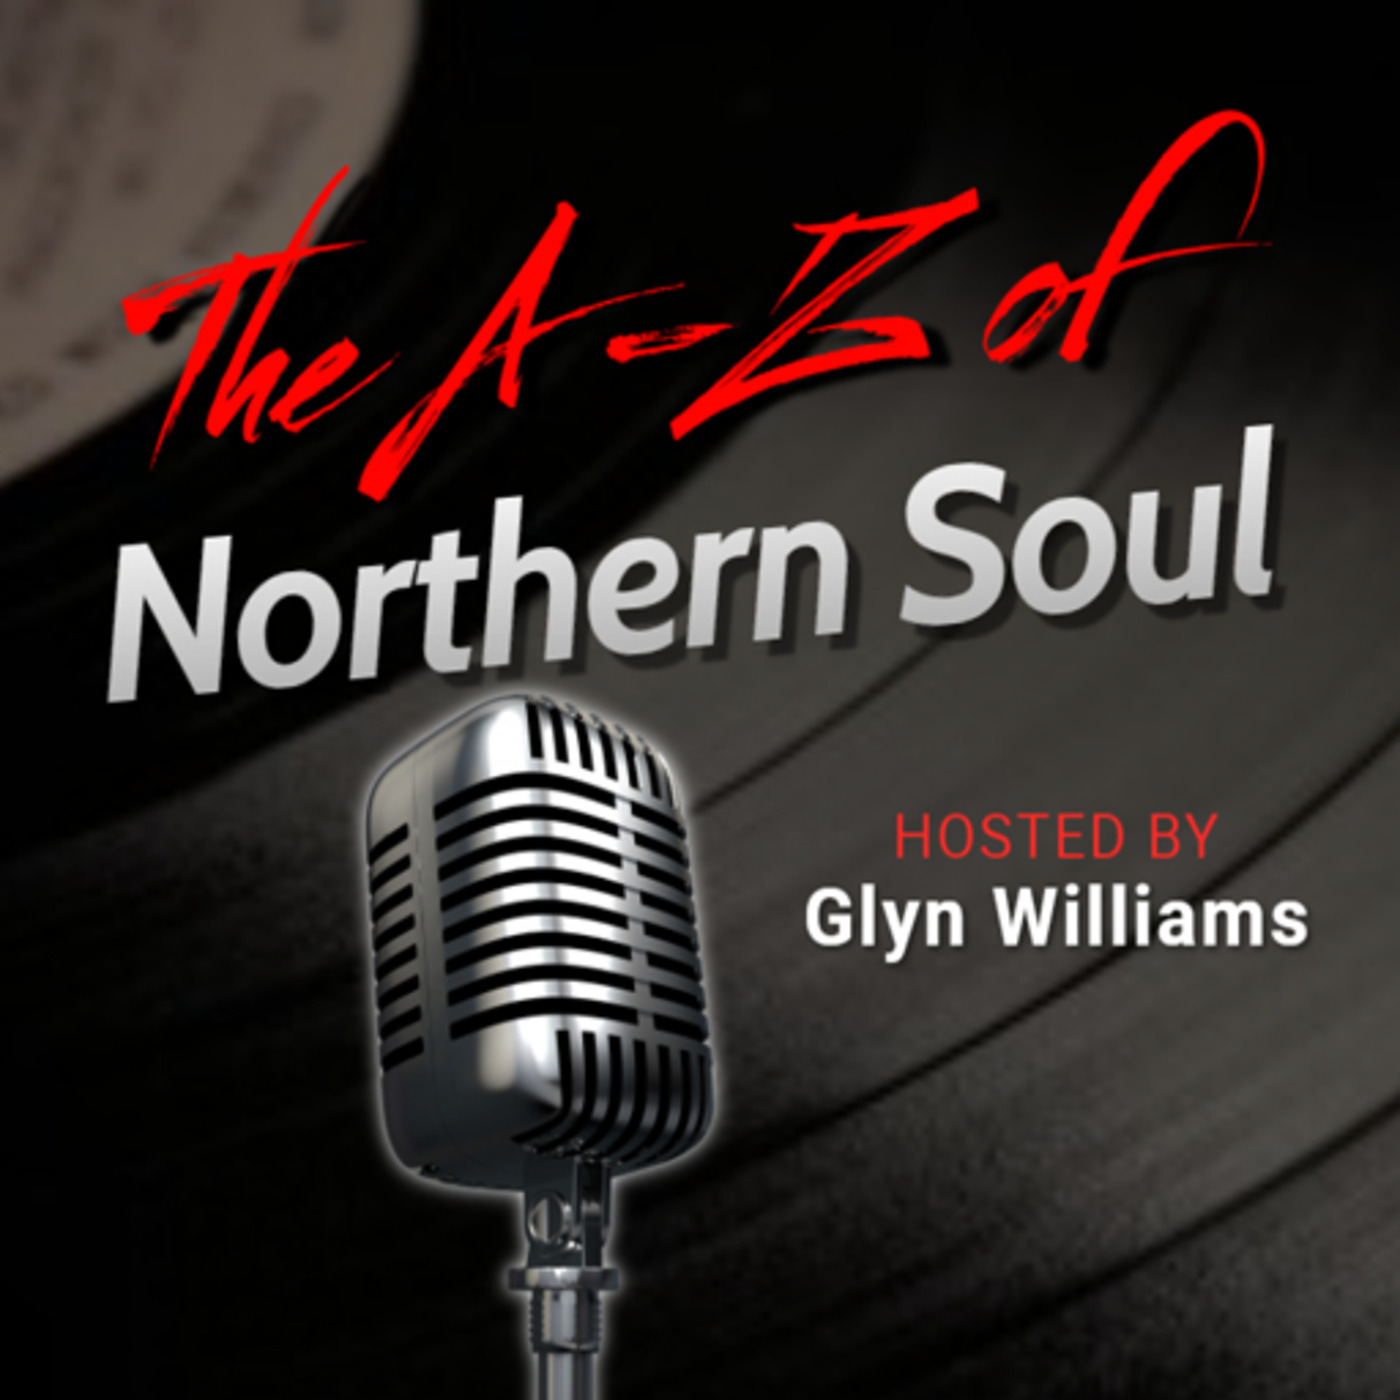 The A-Z of Northern Soul E077